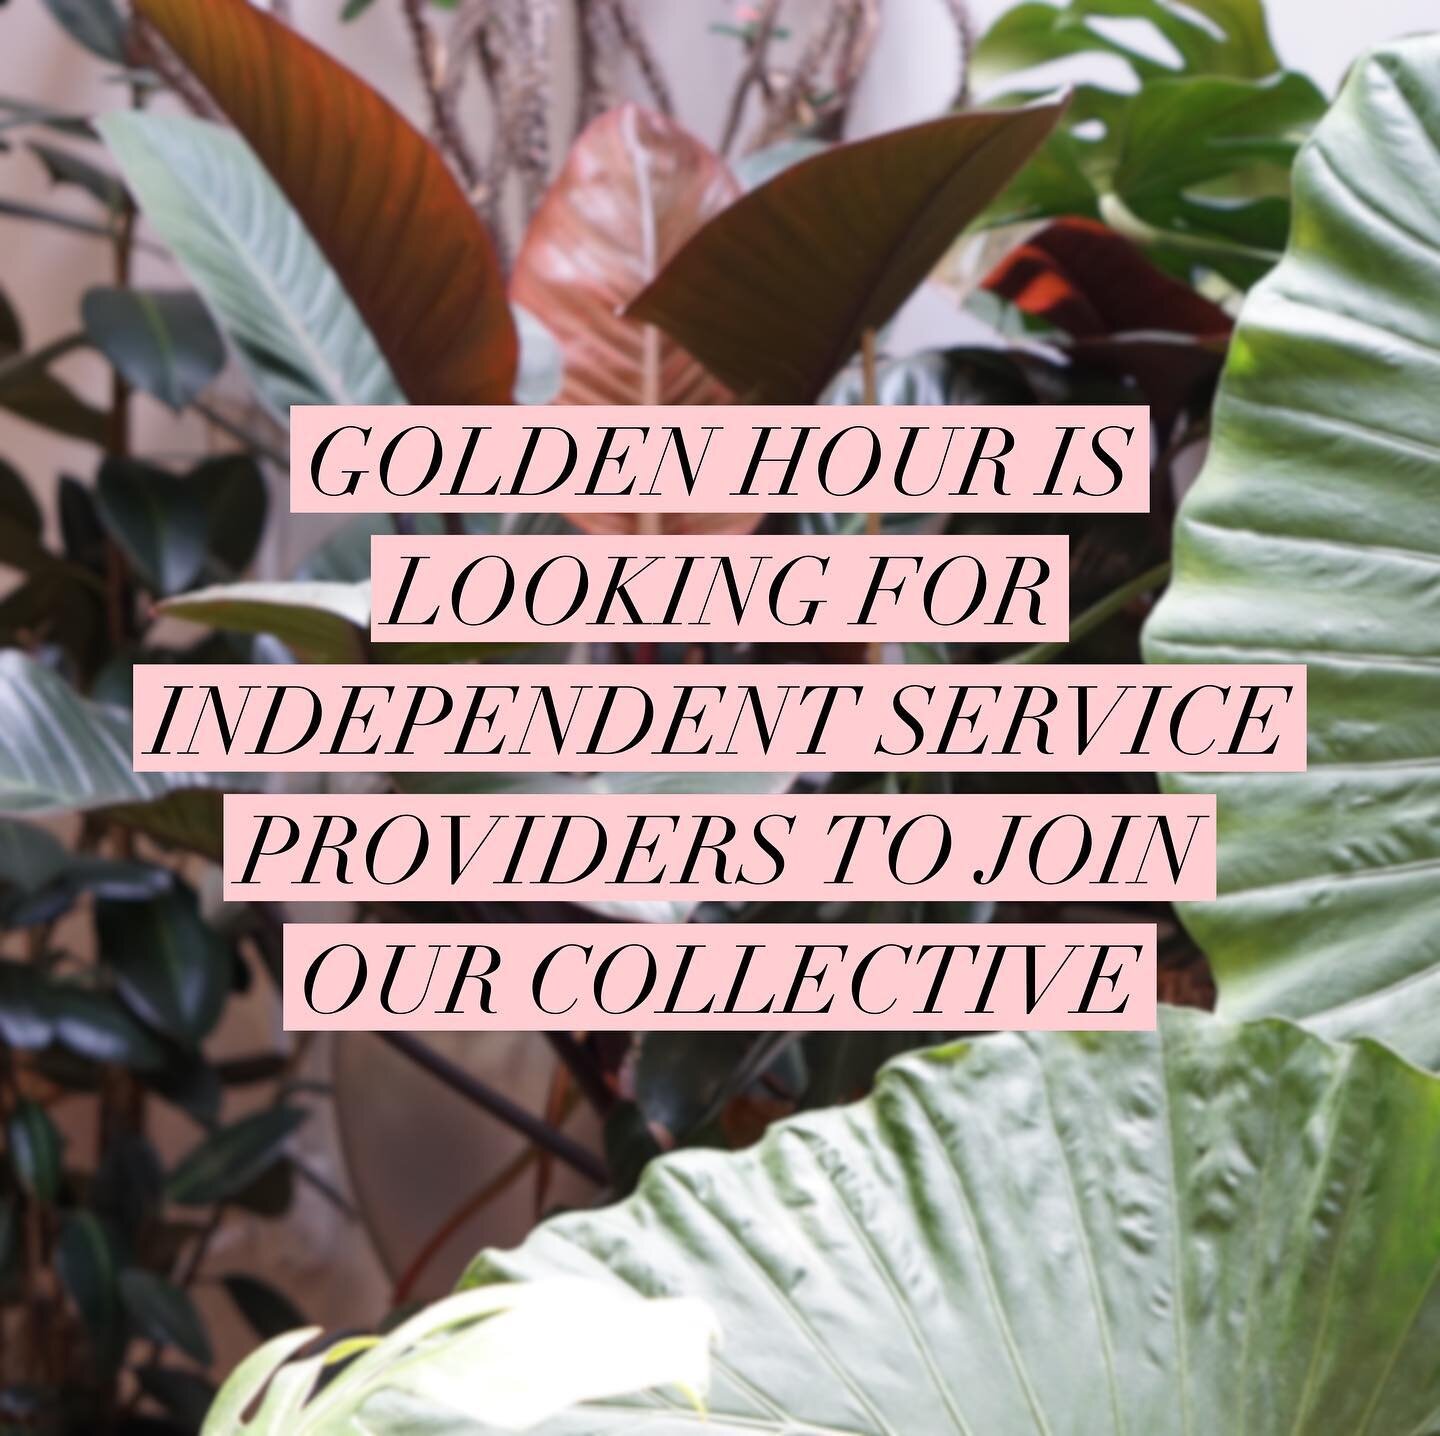 ✨We would love to welcome additional service providers to our beautiful space! We have opportunities for both full and part-time renters. If interested, please email or DM us! 
.
.
.
#hair #hairstylist #chicago #chicagohairstylist #chicagohair #golde